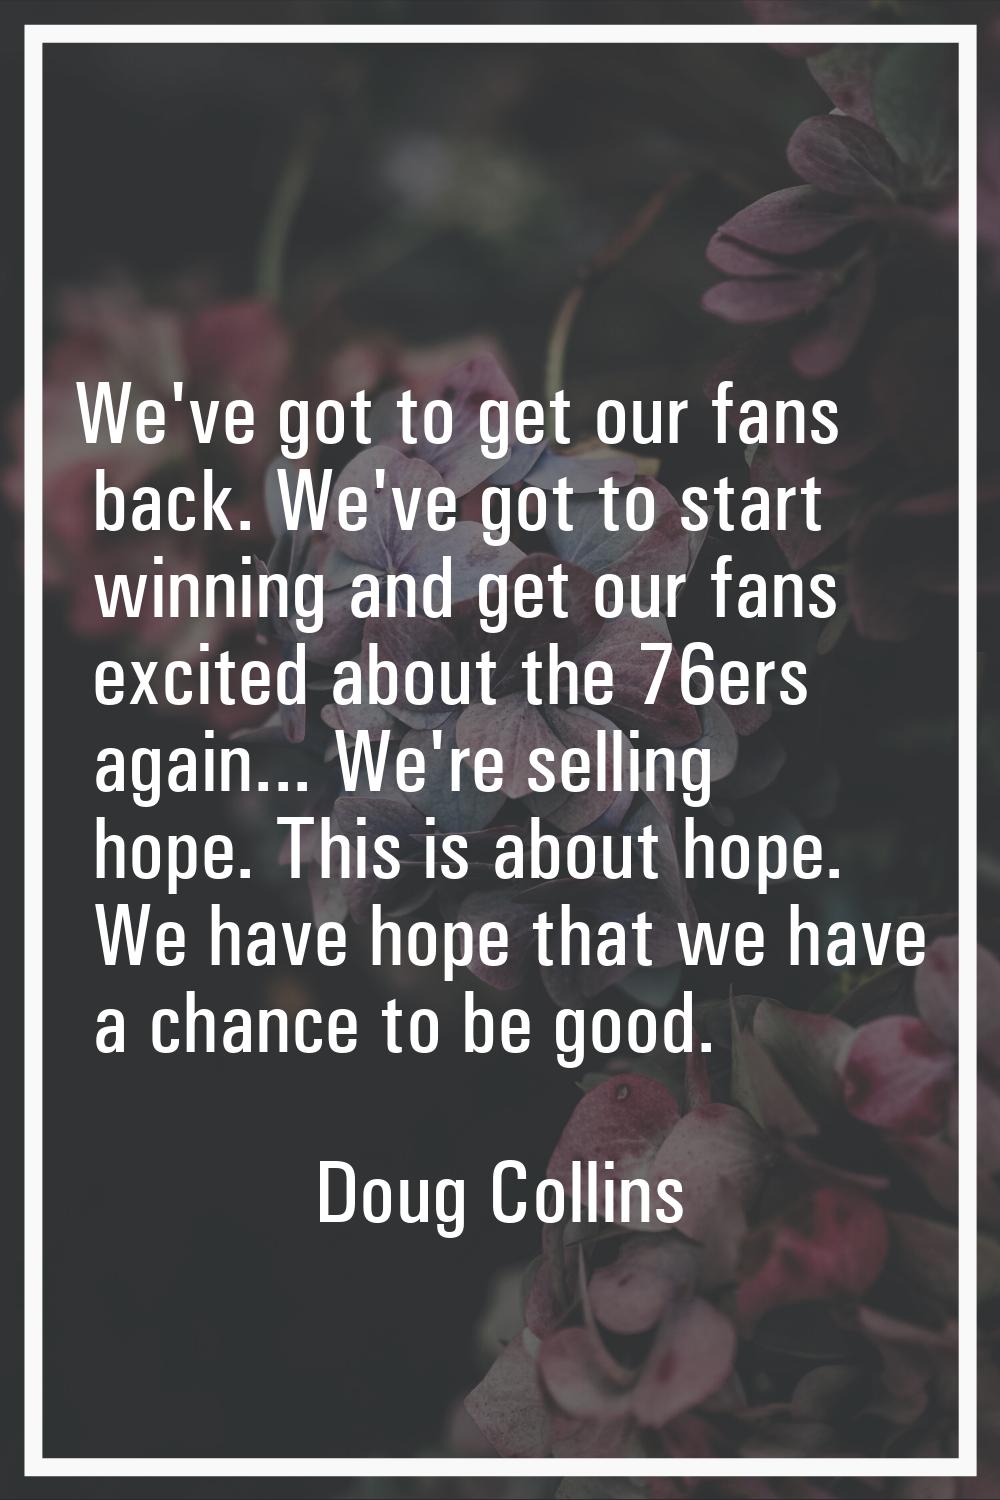 We've got to get our fans back. We've got to start winning and get our fans excited about the 76ers